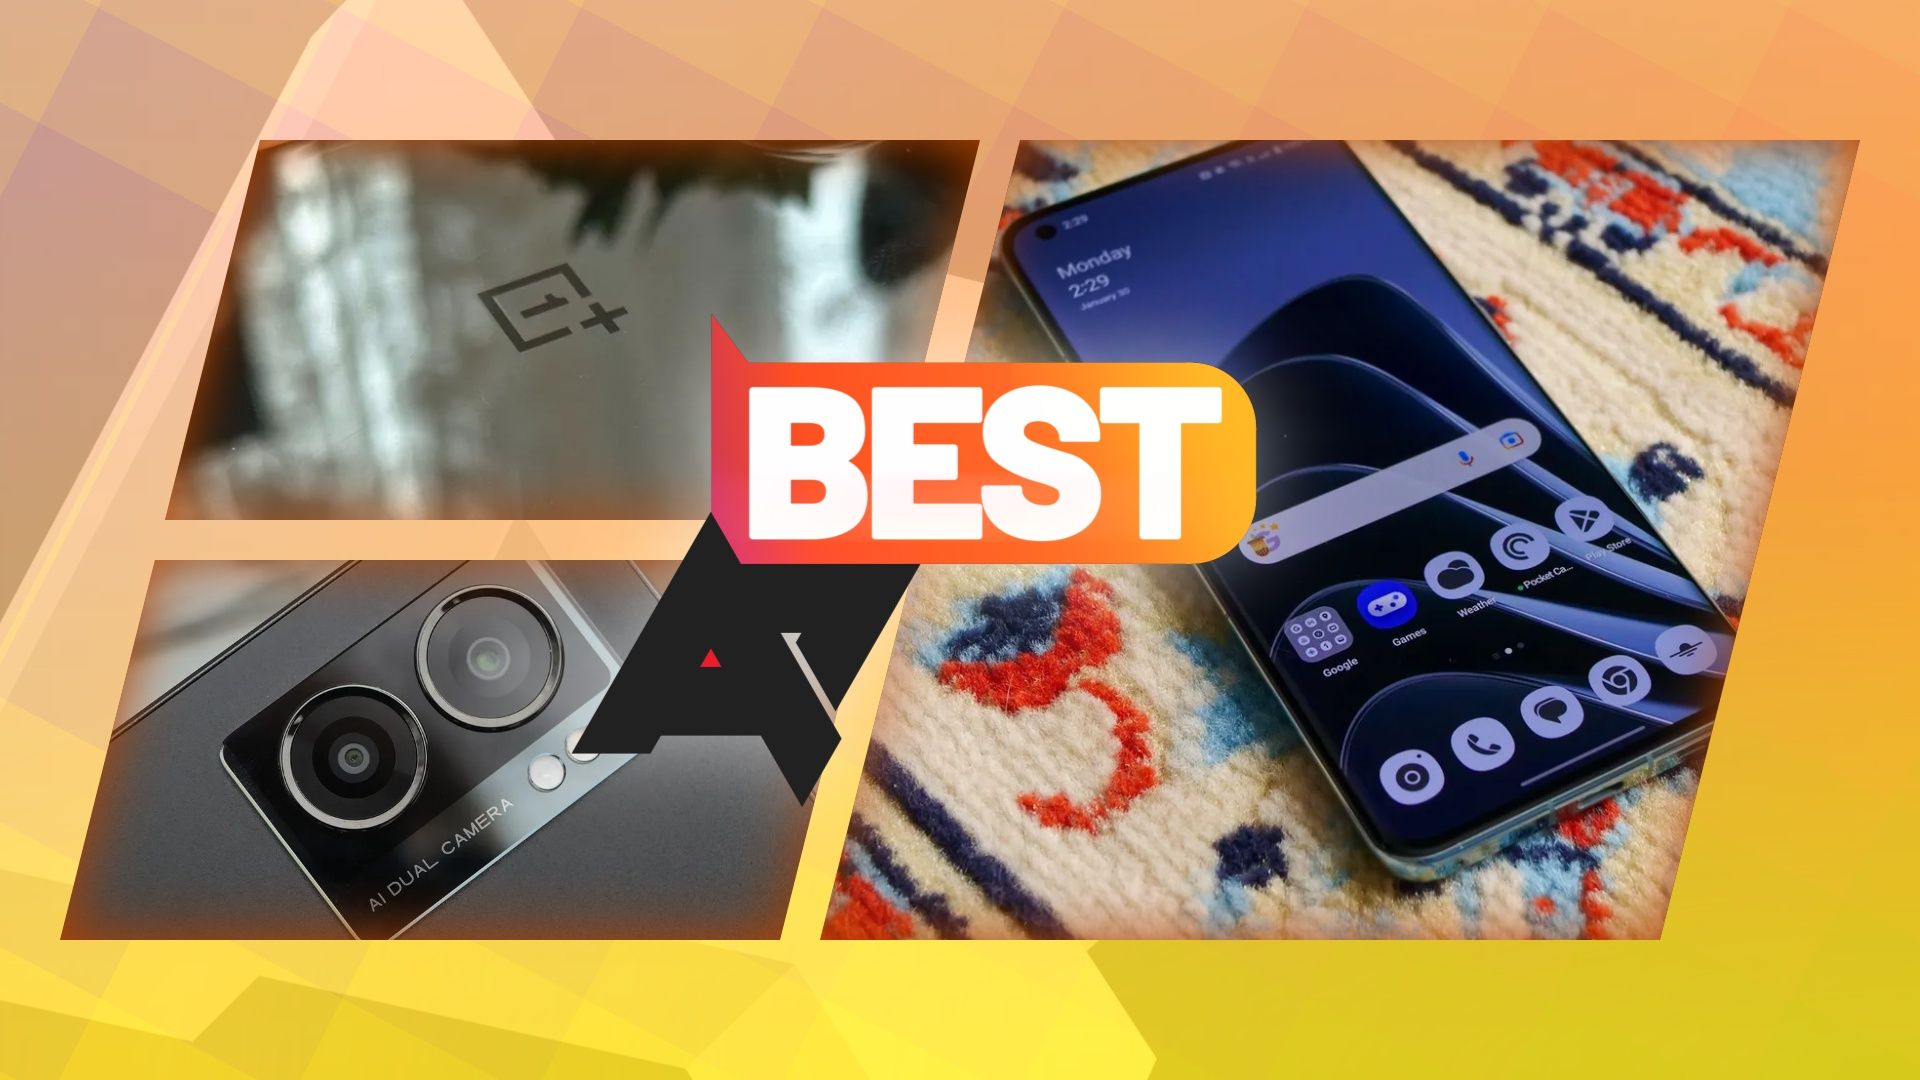 Three photos of OnePlus phones from different angles with an 'AP Best' logo on top